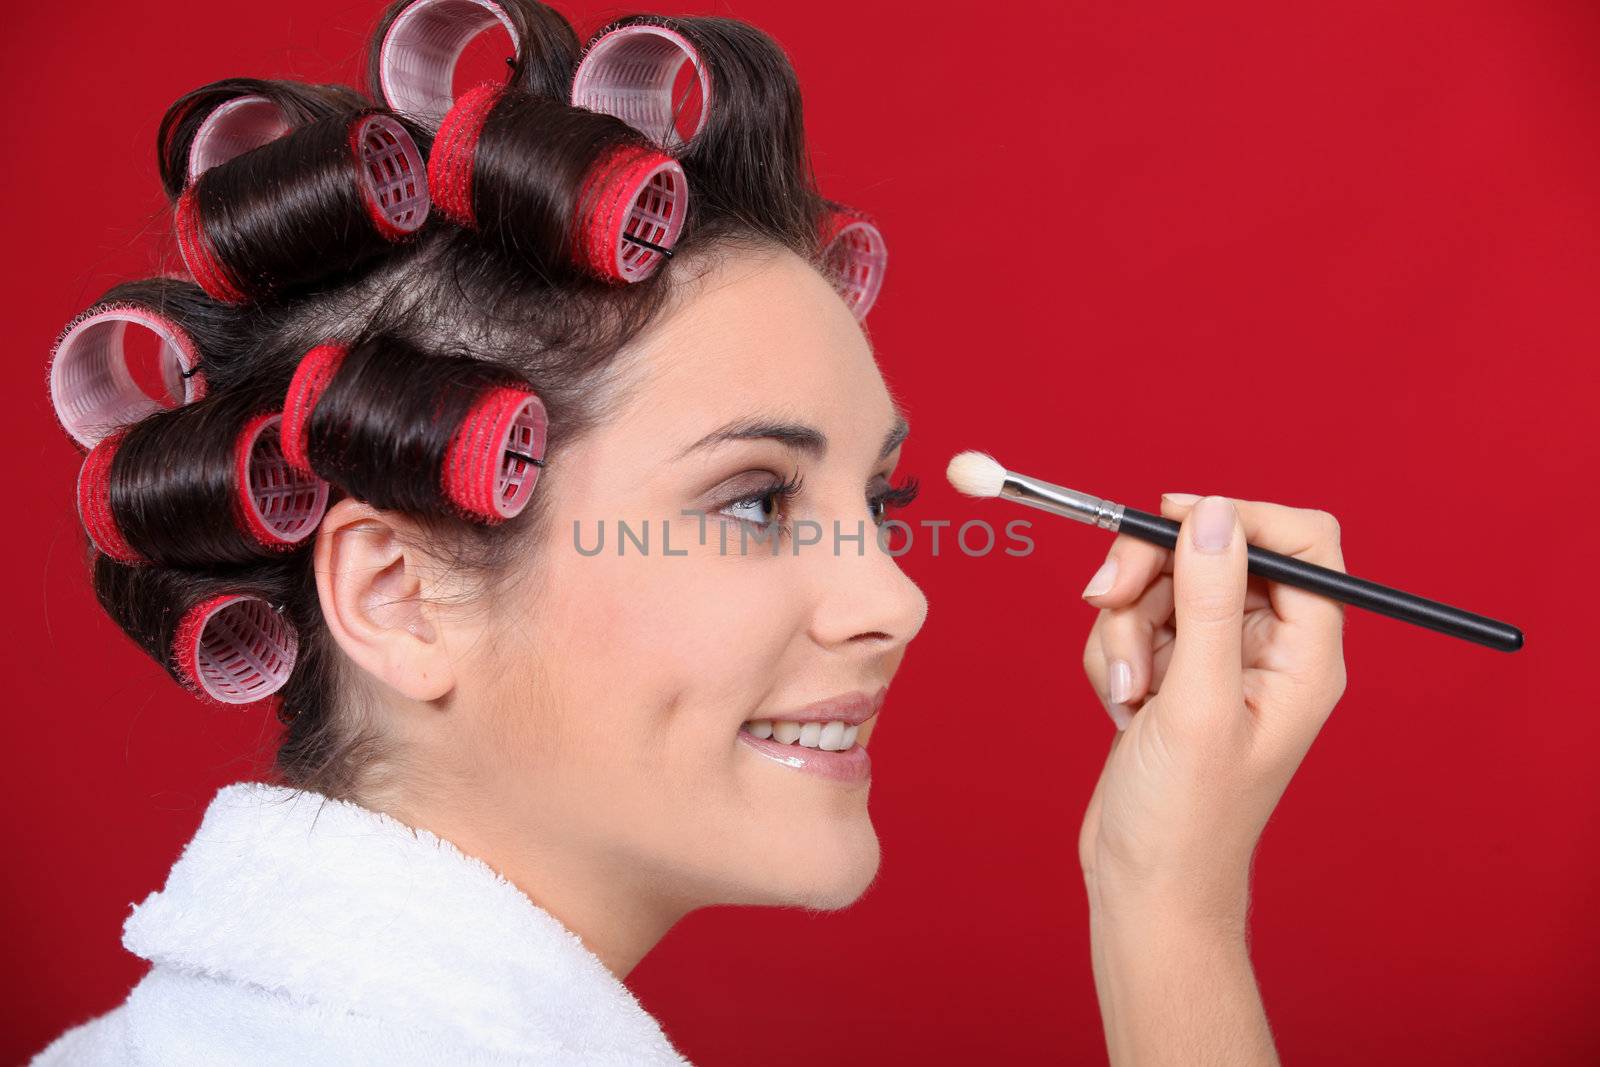 Woman with hair curlers applying make-up by phovoir